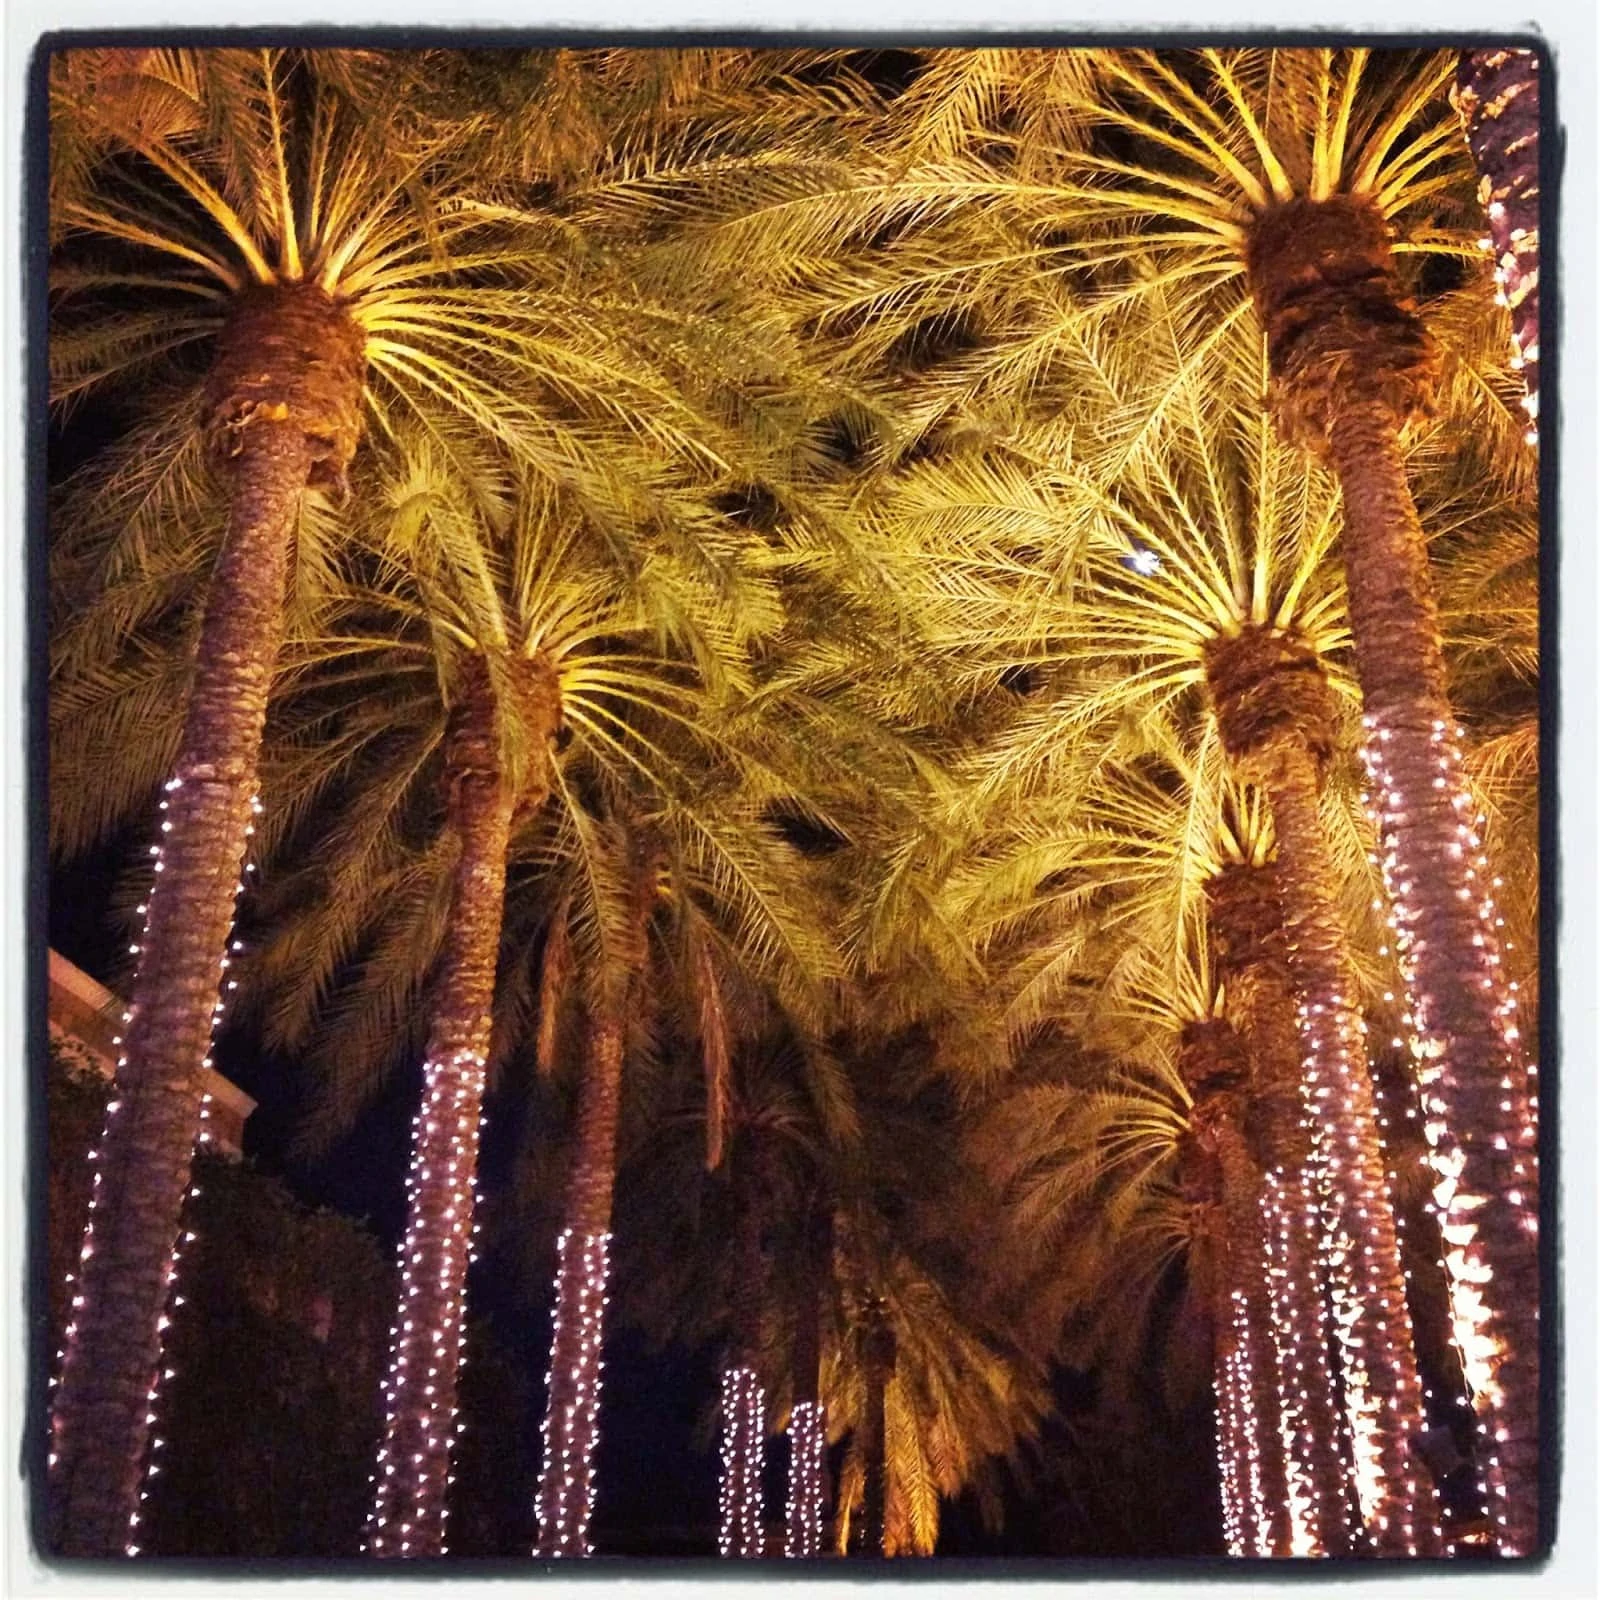 Palm trees with lights on them all in a row.